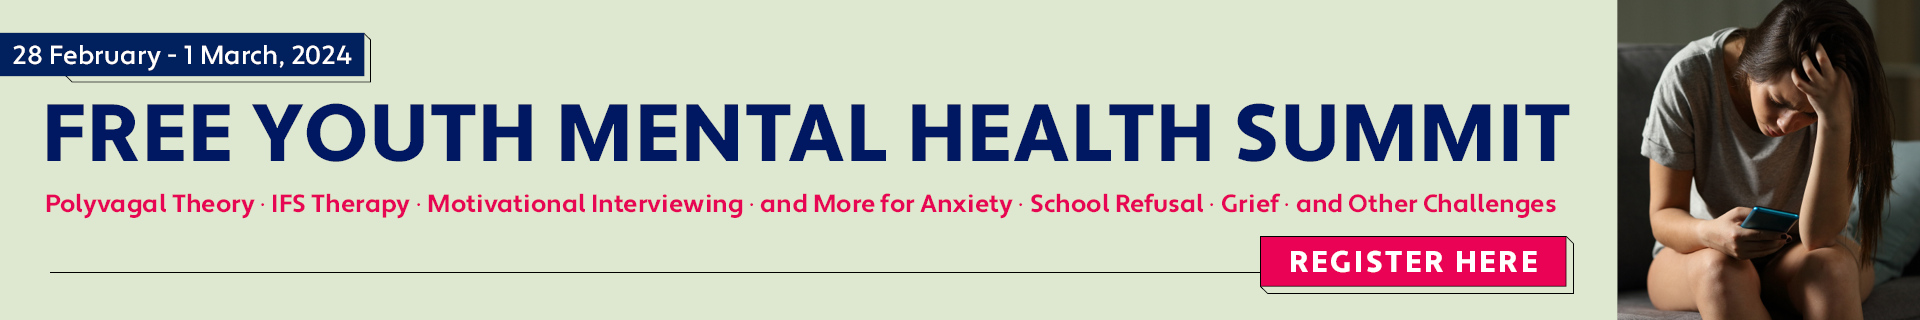 Youth Mental Health Summit: Polyvagal Theory, IFS Therapy, Motivational Interviewing, and More for Anxiety, School Refusal, Grief, Addiction, and Other Challenges